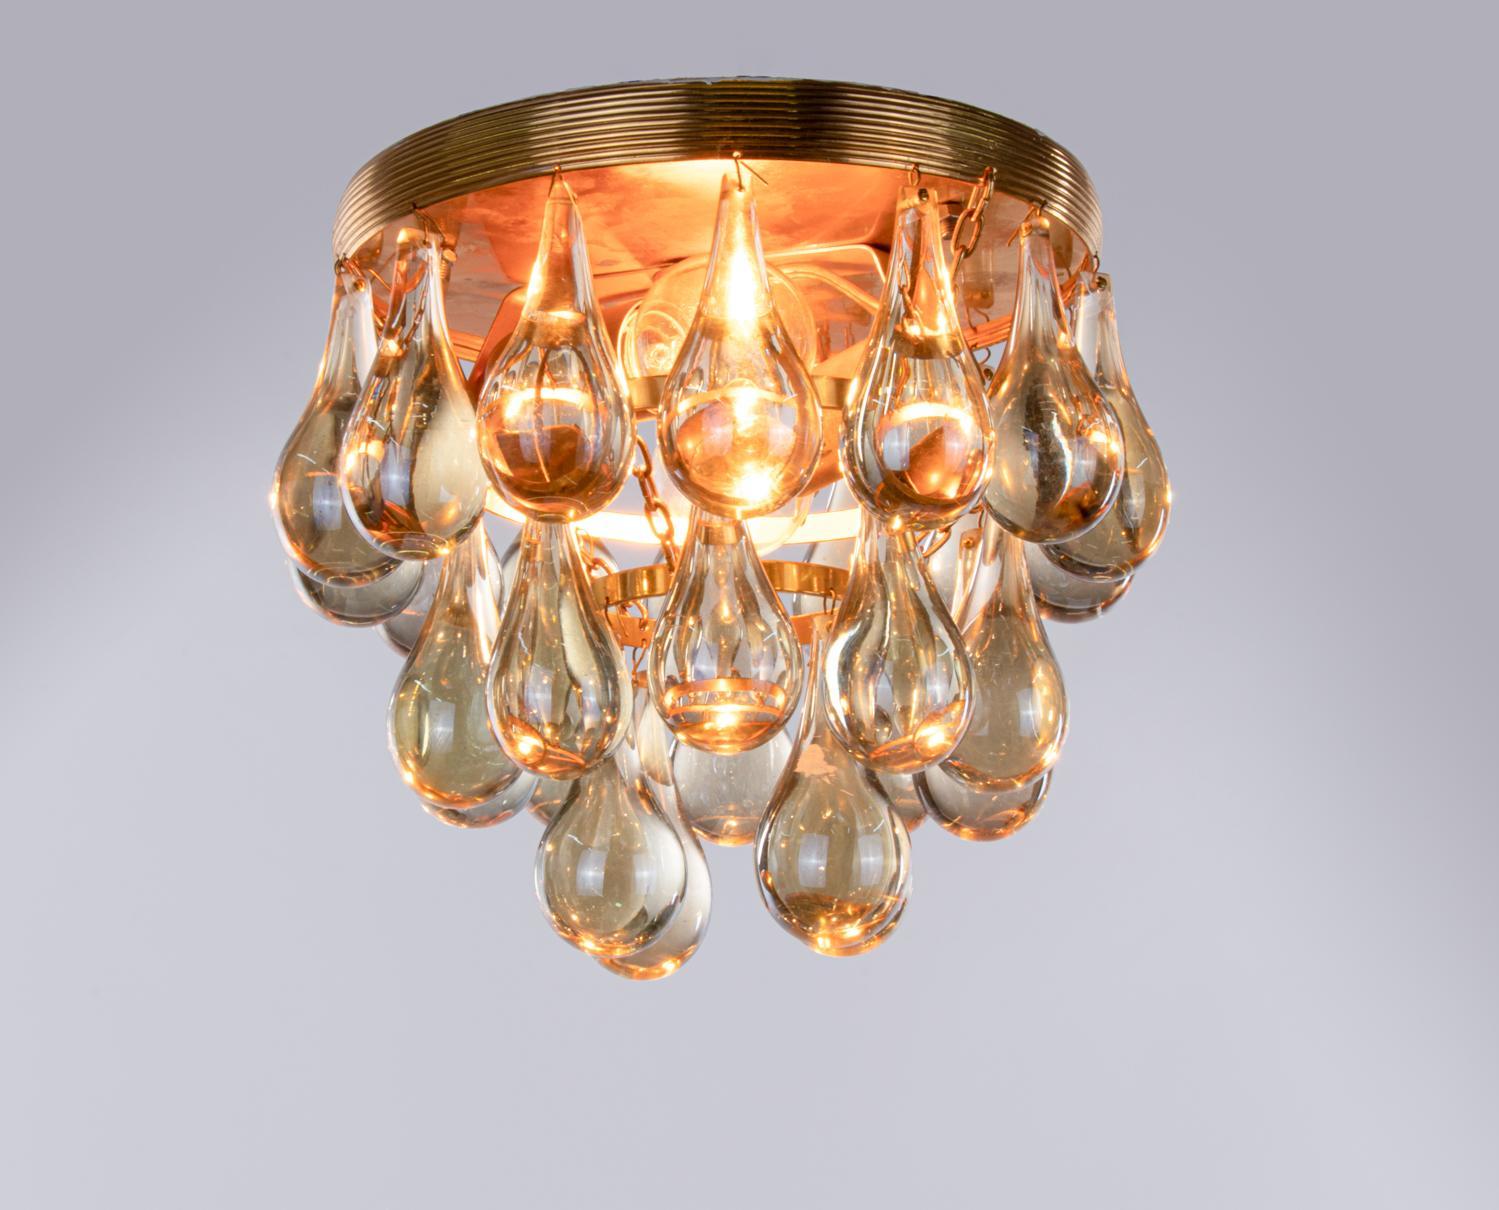 Elegant small flush mount chandelier with a gold-plated brass frame and Murano glass teardrops. These lamps have an incomparable unique character. A touch of luxury fills the room. Manufacturer: Palwa, Palme & Walter, Germany, 1960s. 
 
Measures: